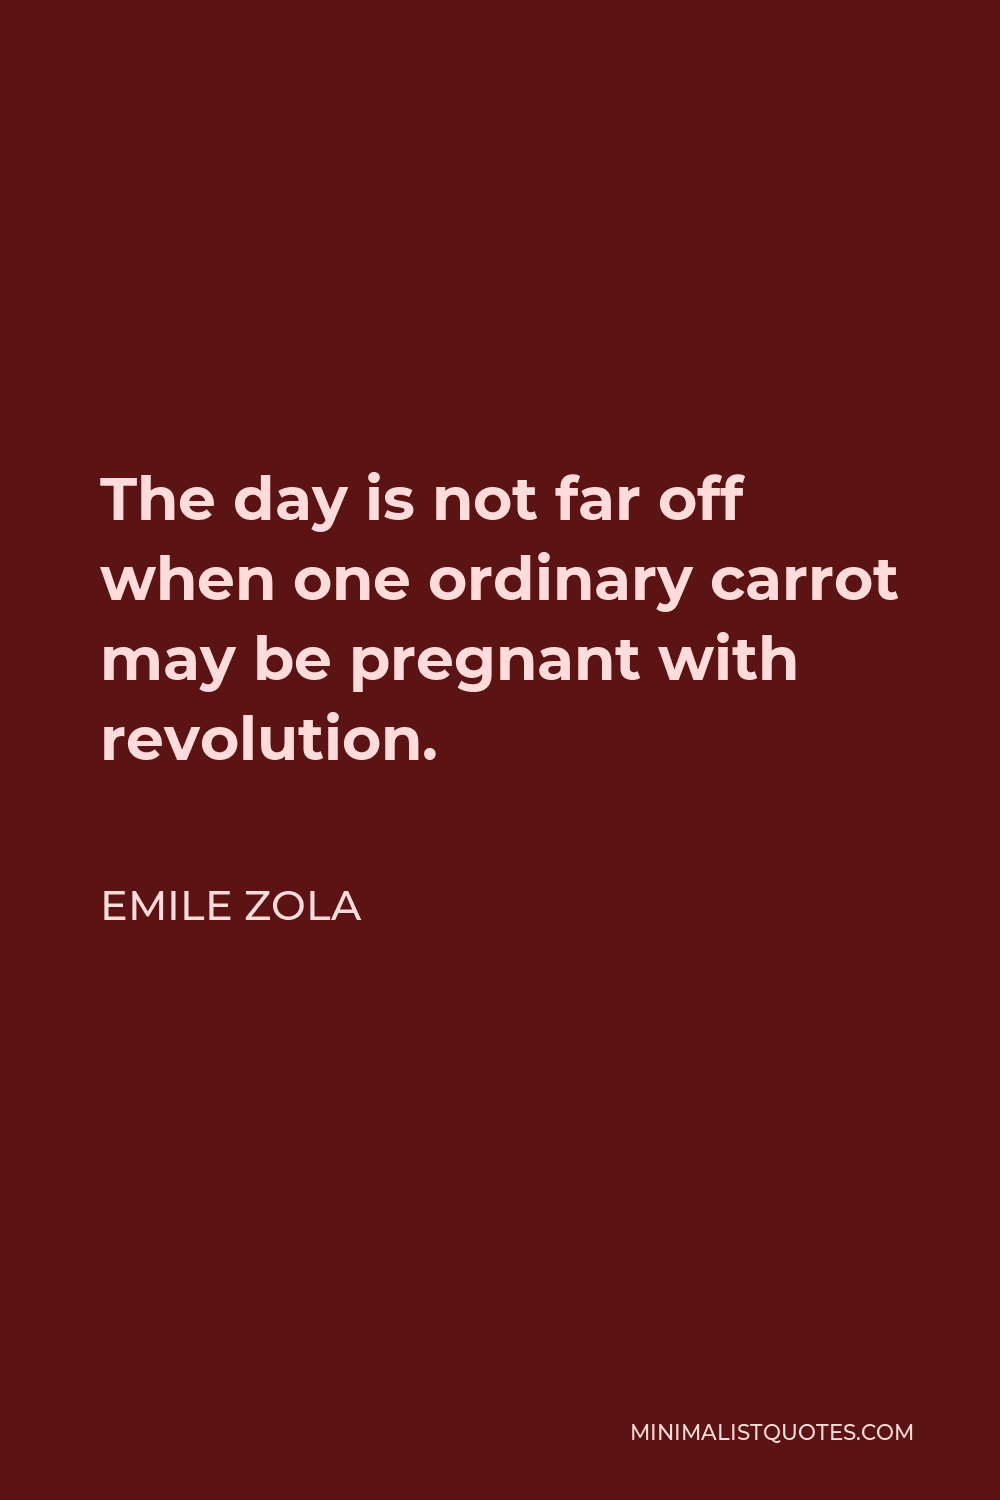 Emile Zola Quote - The day is not far off when one ordinary carrot may be pregnant with revolution.